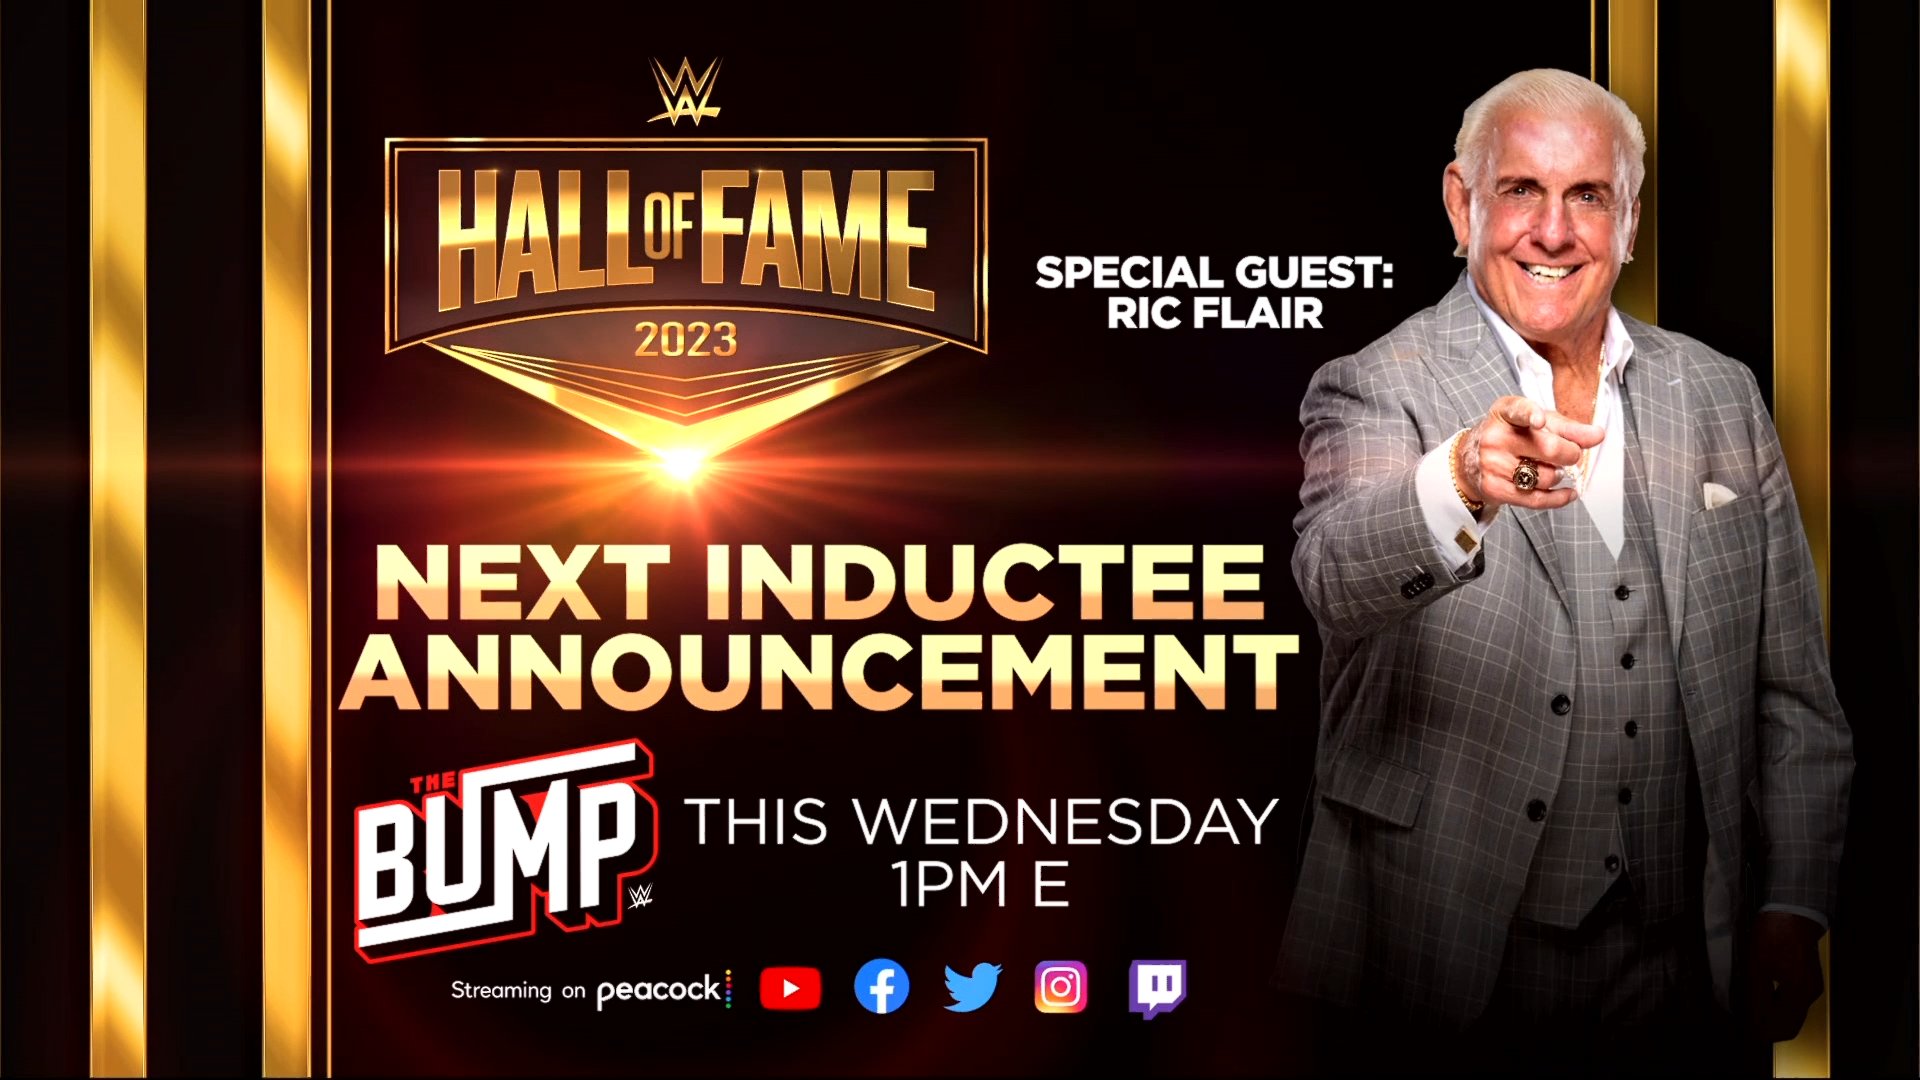 Spoiler On Next WWE Hall Of Fame Inductee